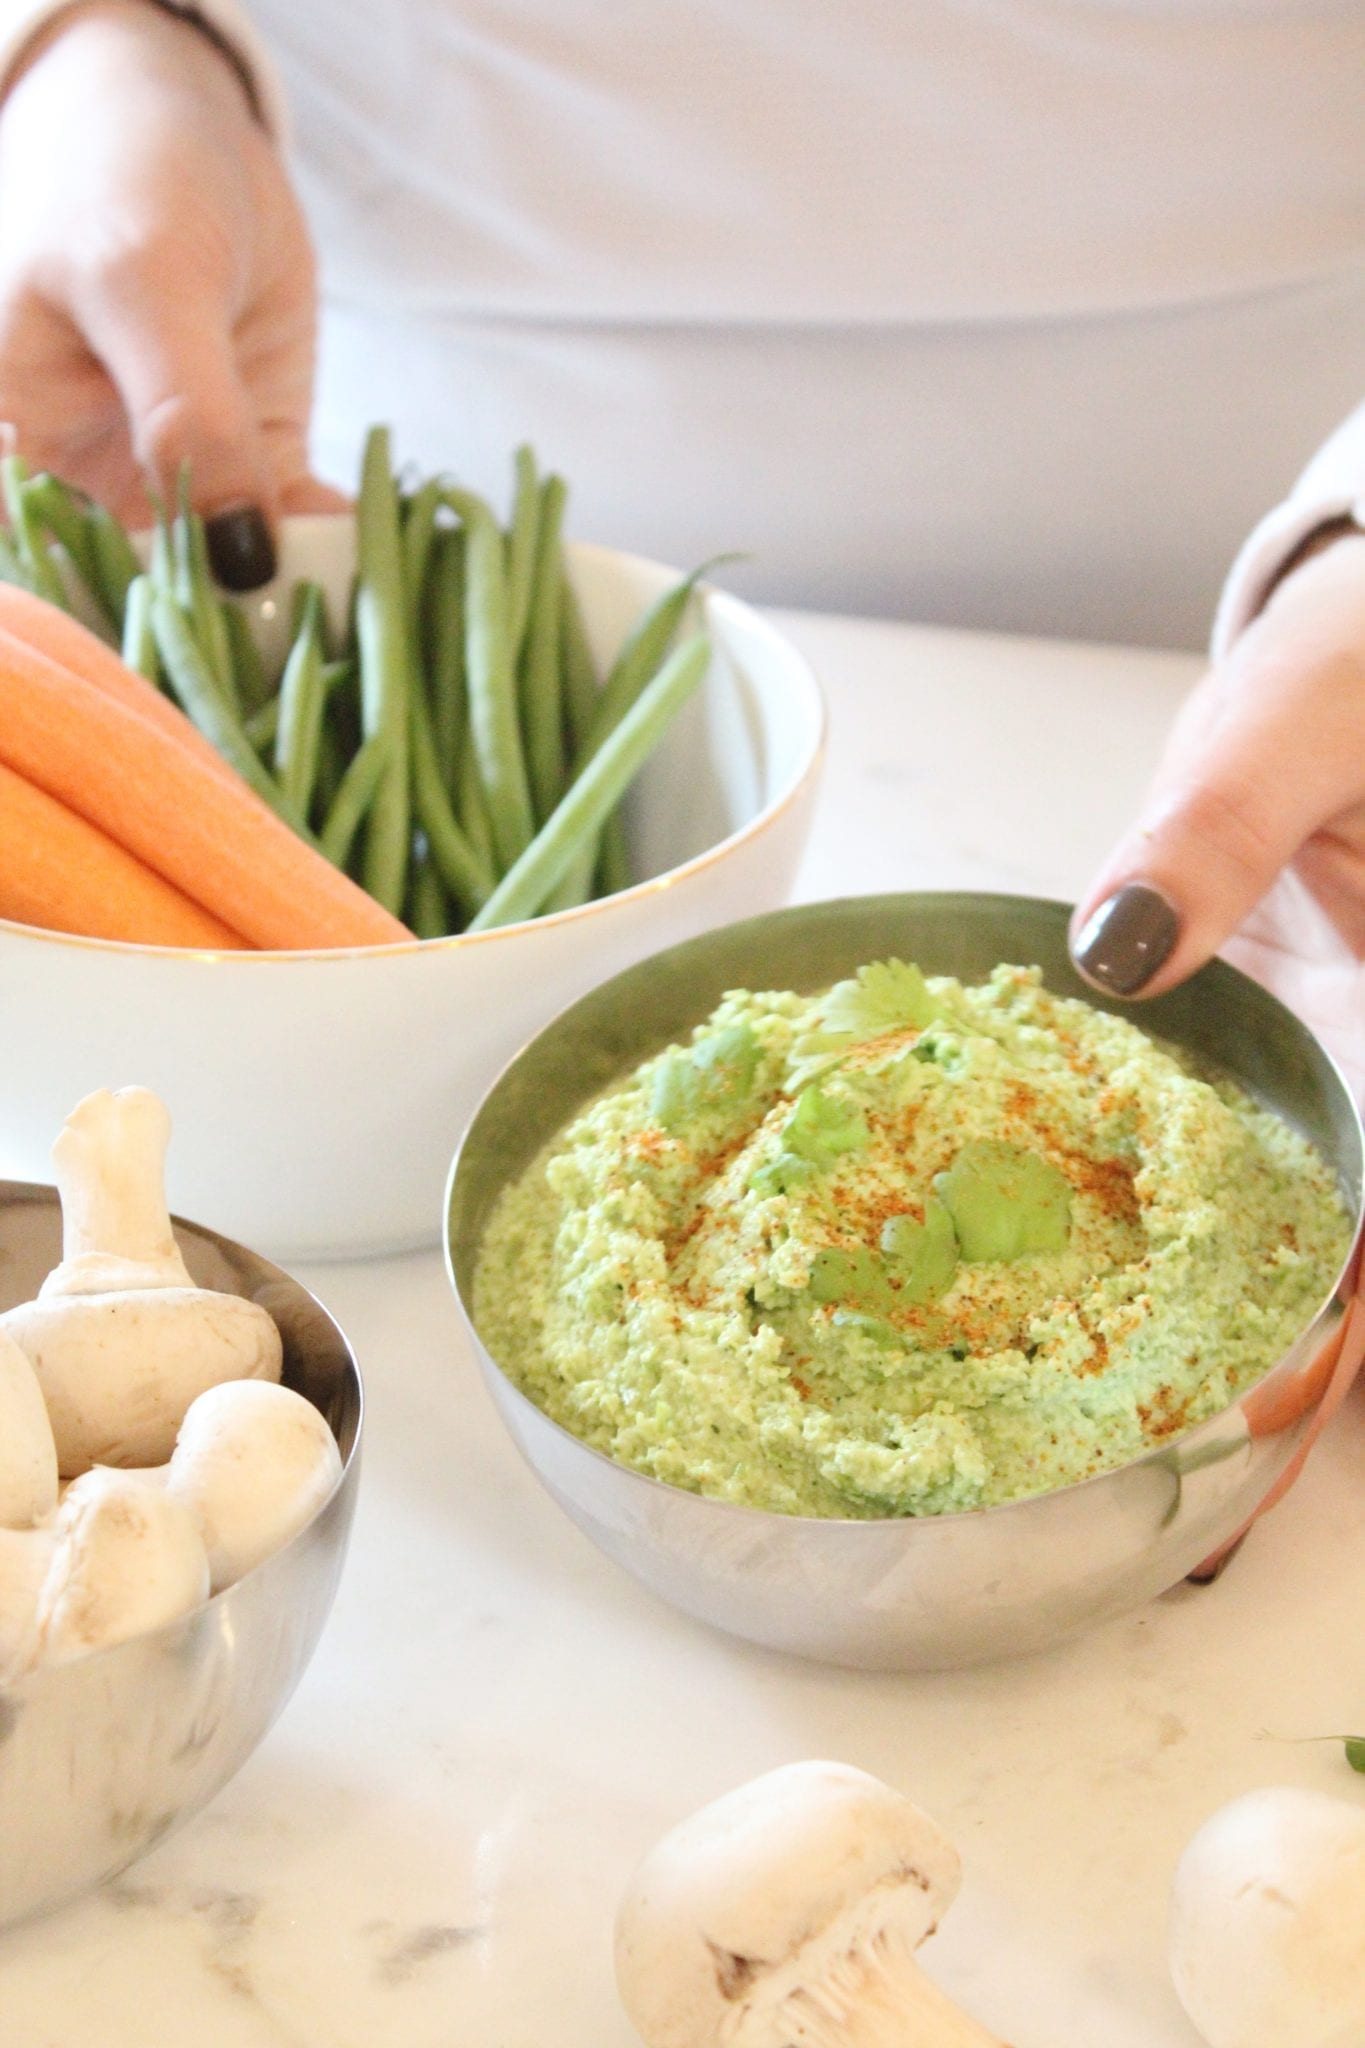 Looking for a party dip that is healthy while still being delicious? This Spicy Hummus Dip is perfect for everyone!